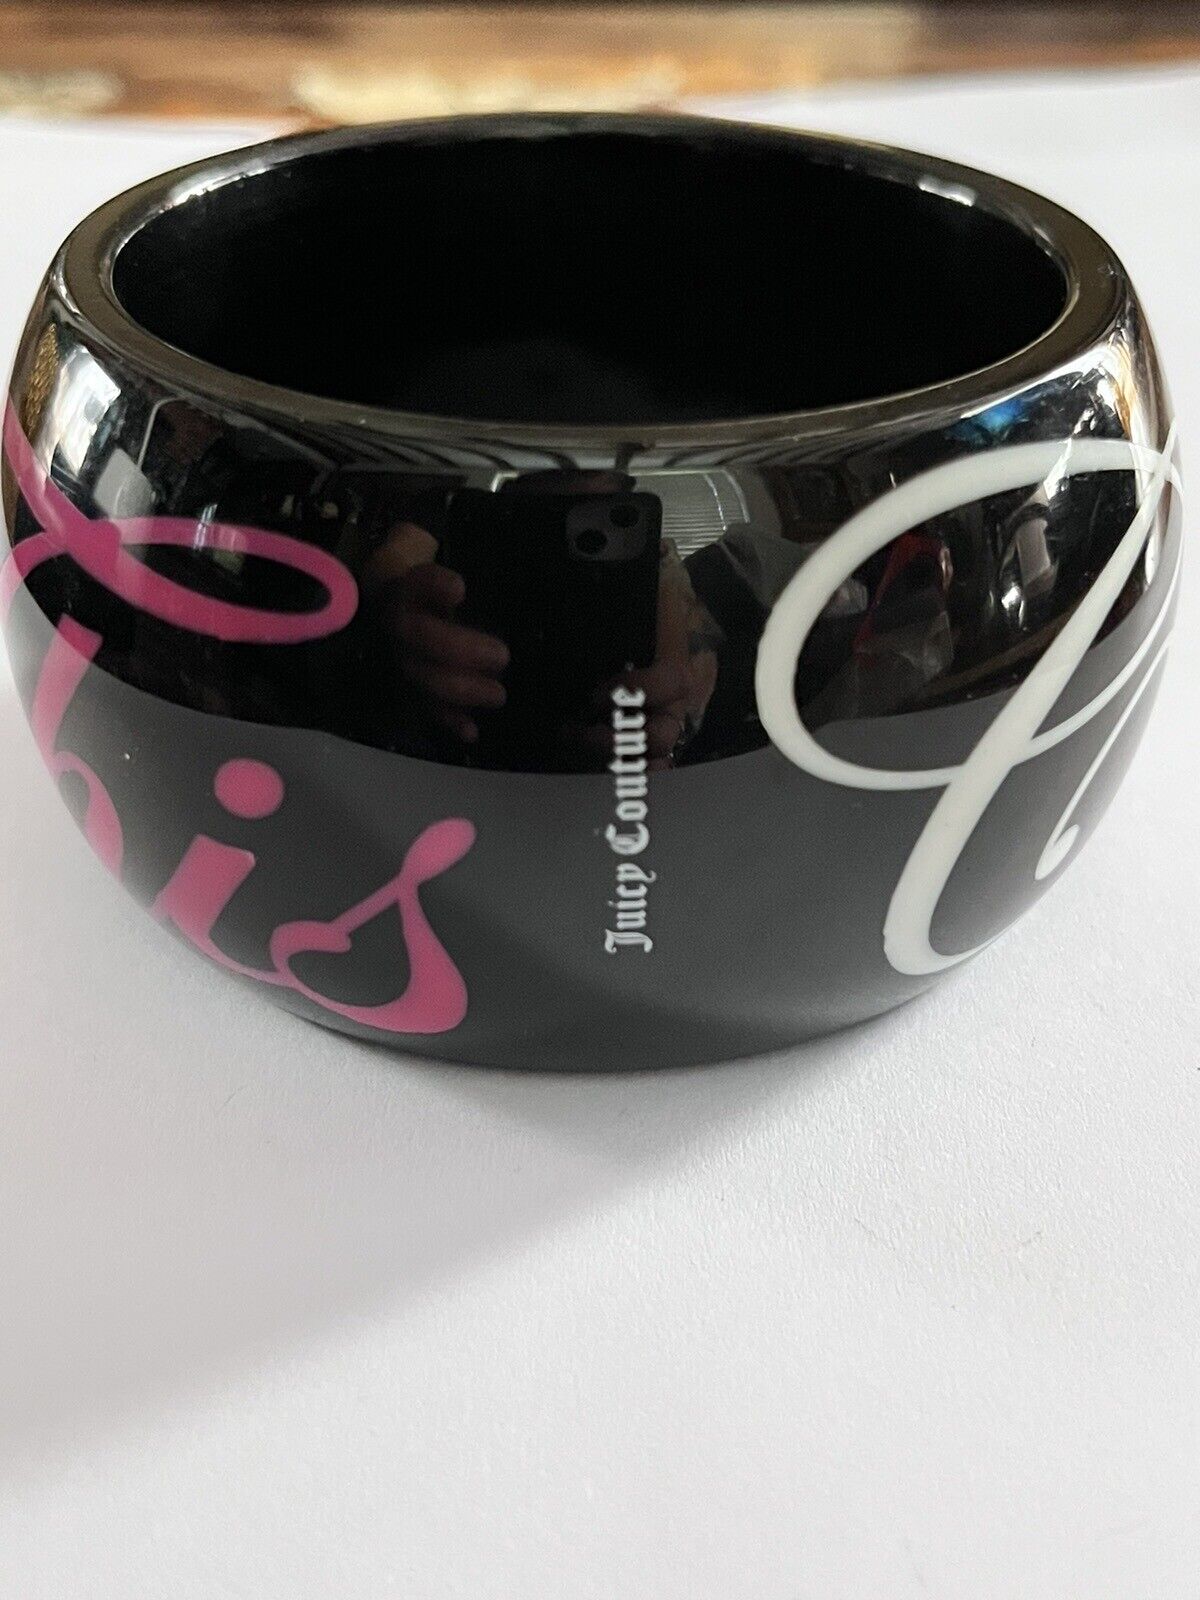 Juicy Couture Statement This Couture Bangle